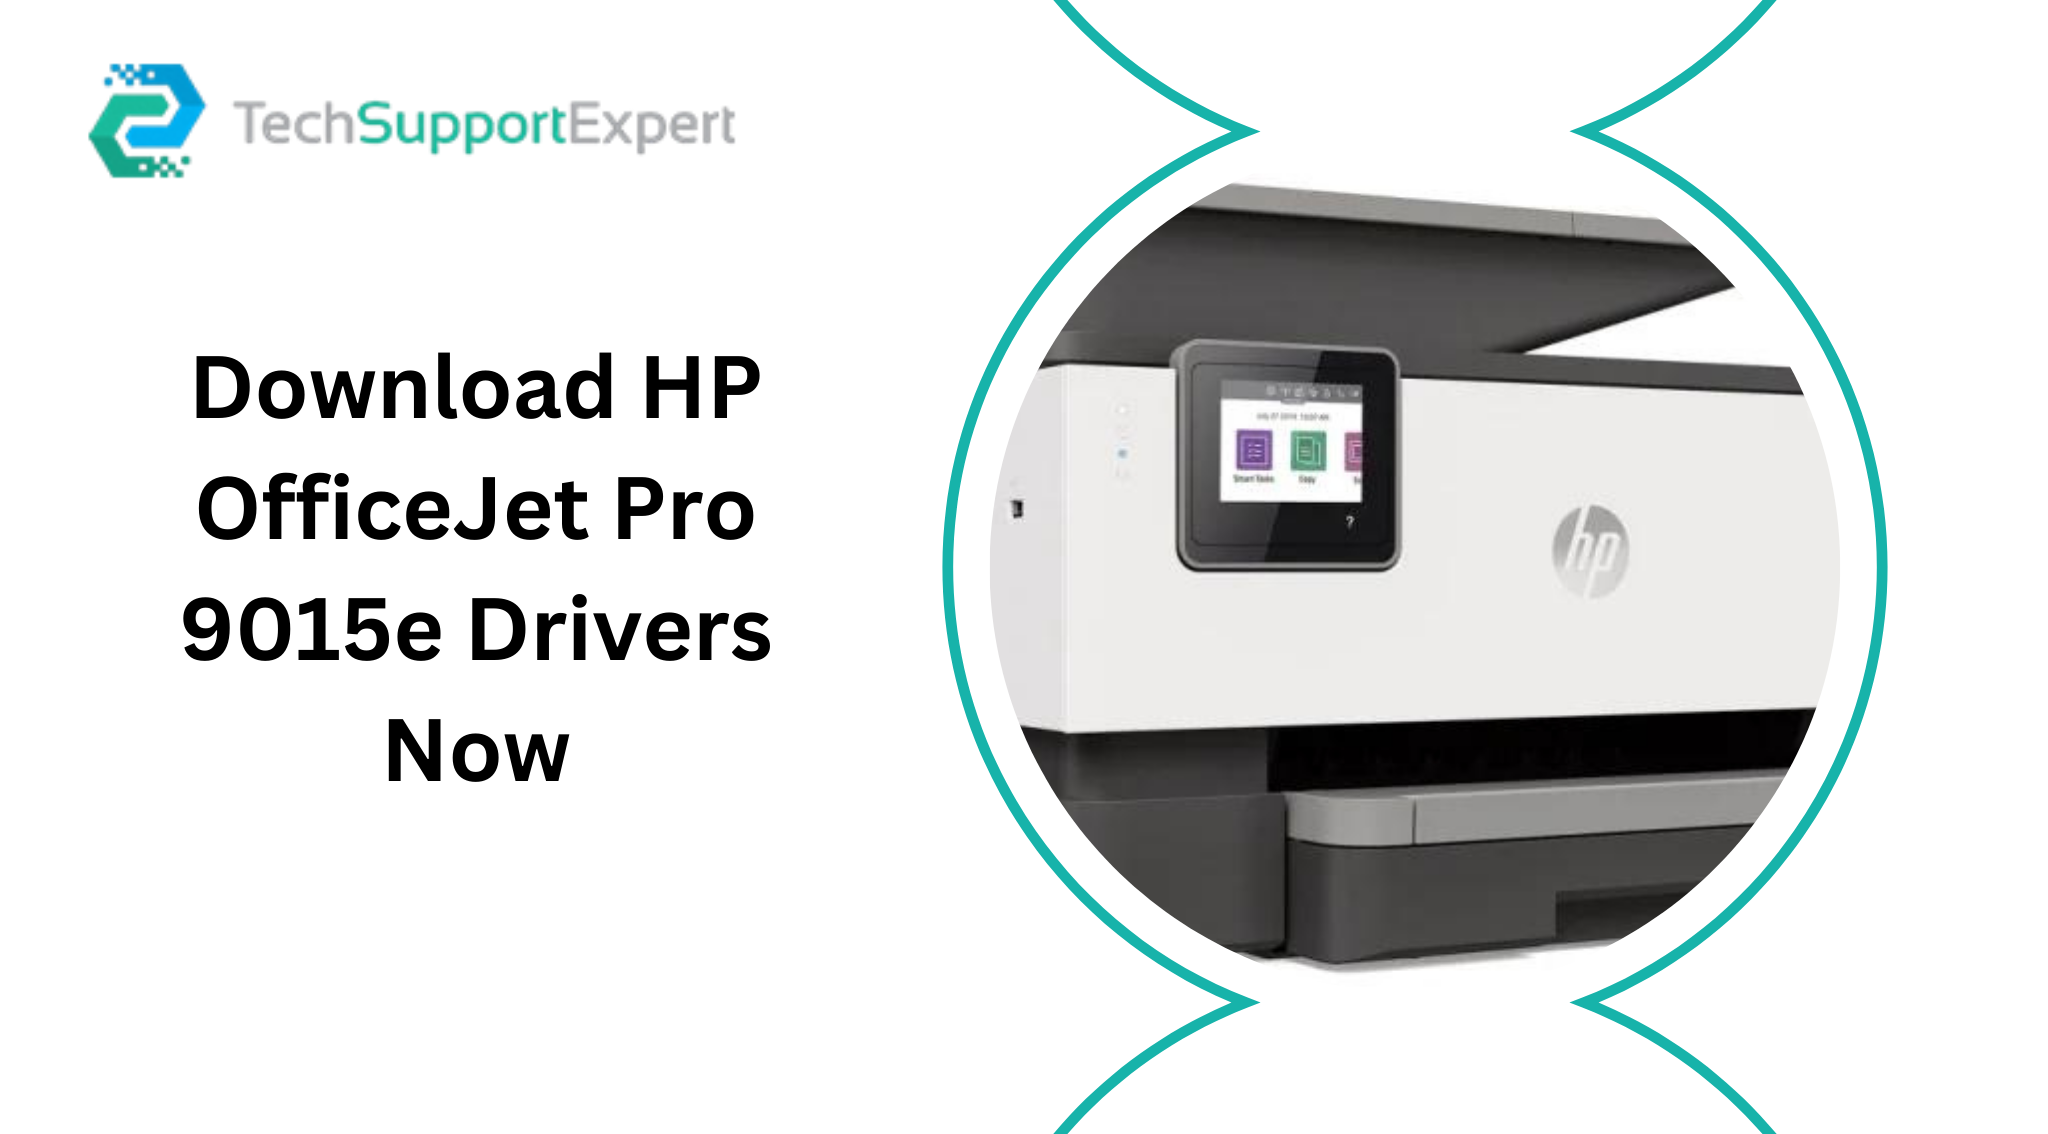 Download HP OfficeJet Pro 9015e Drivers Now